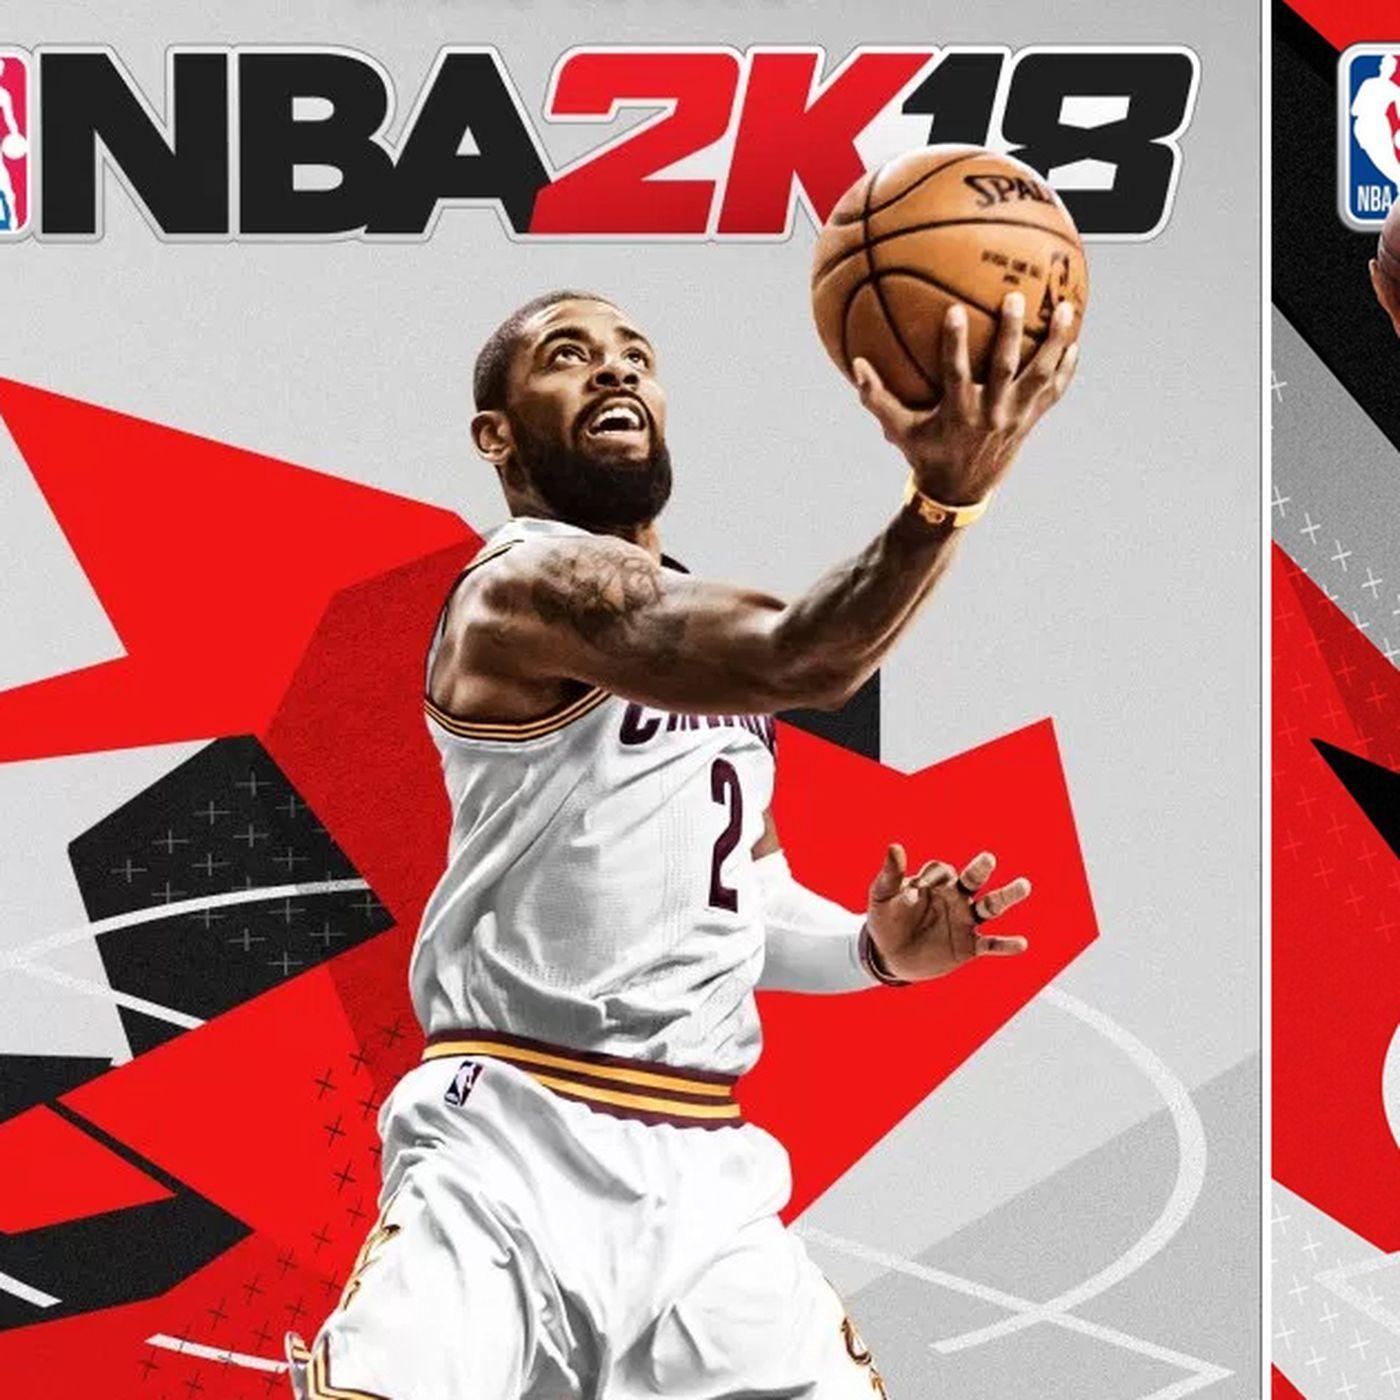 Red Basketball Player Logo - Here's everything you need to know about 'NBA 2K18'